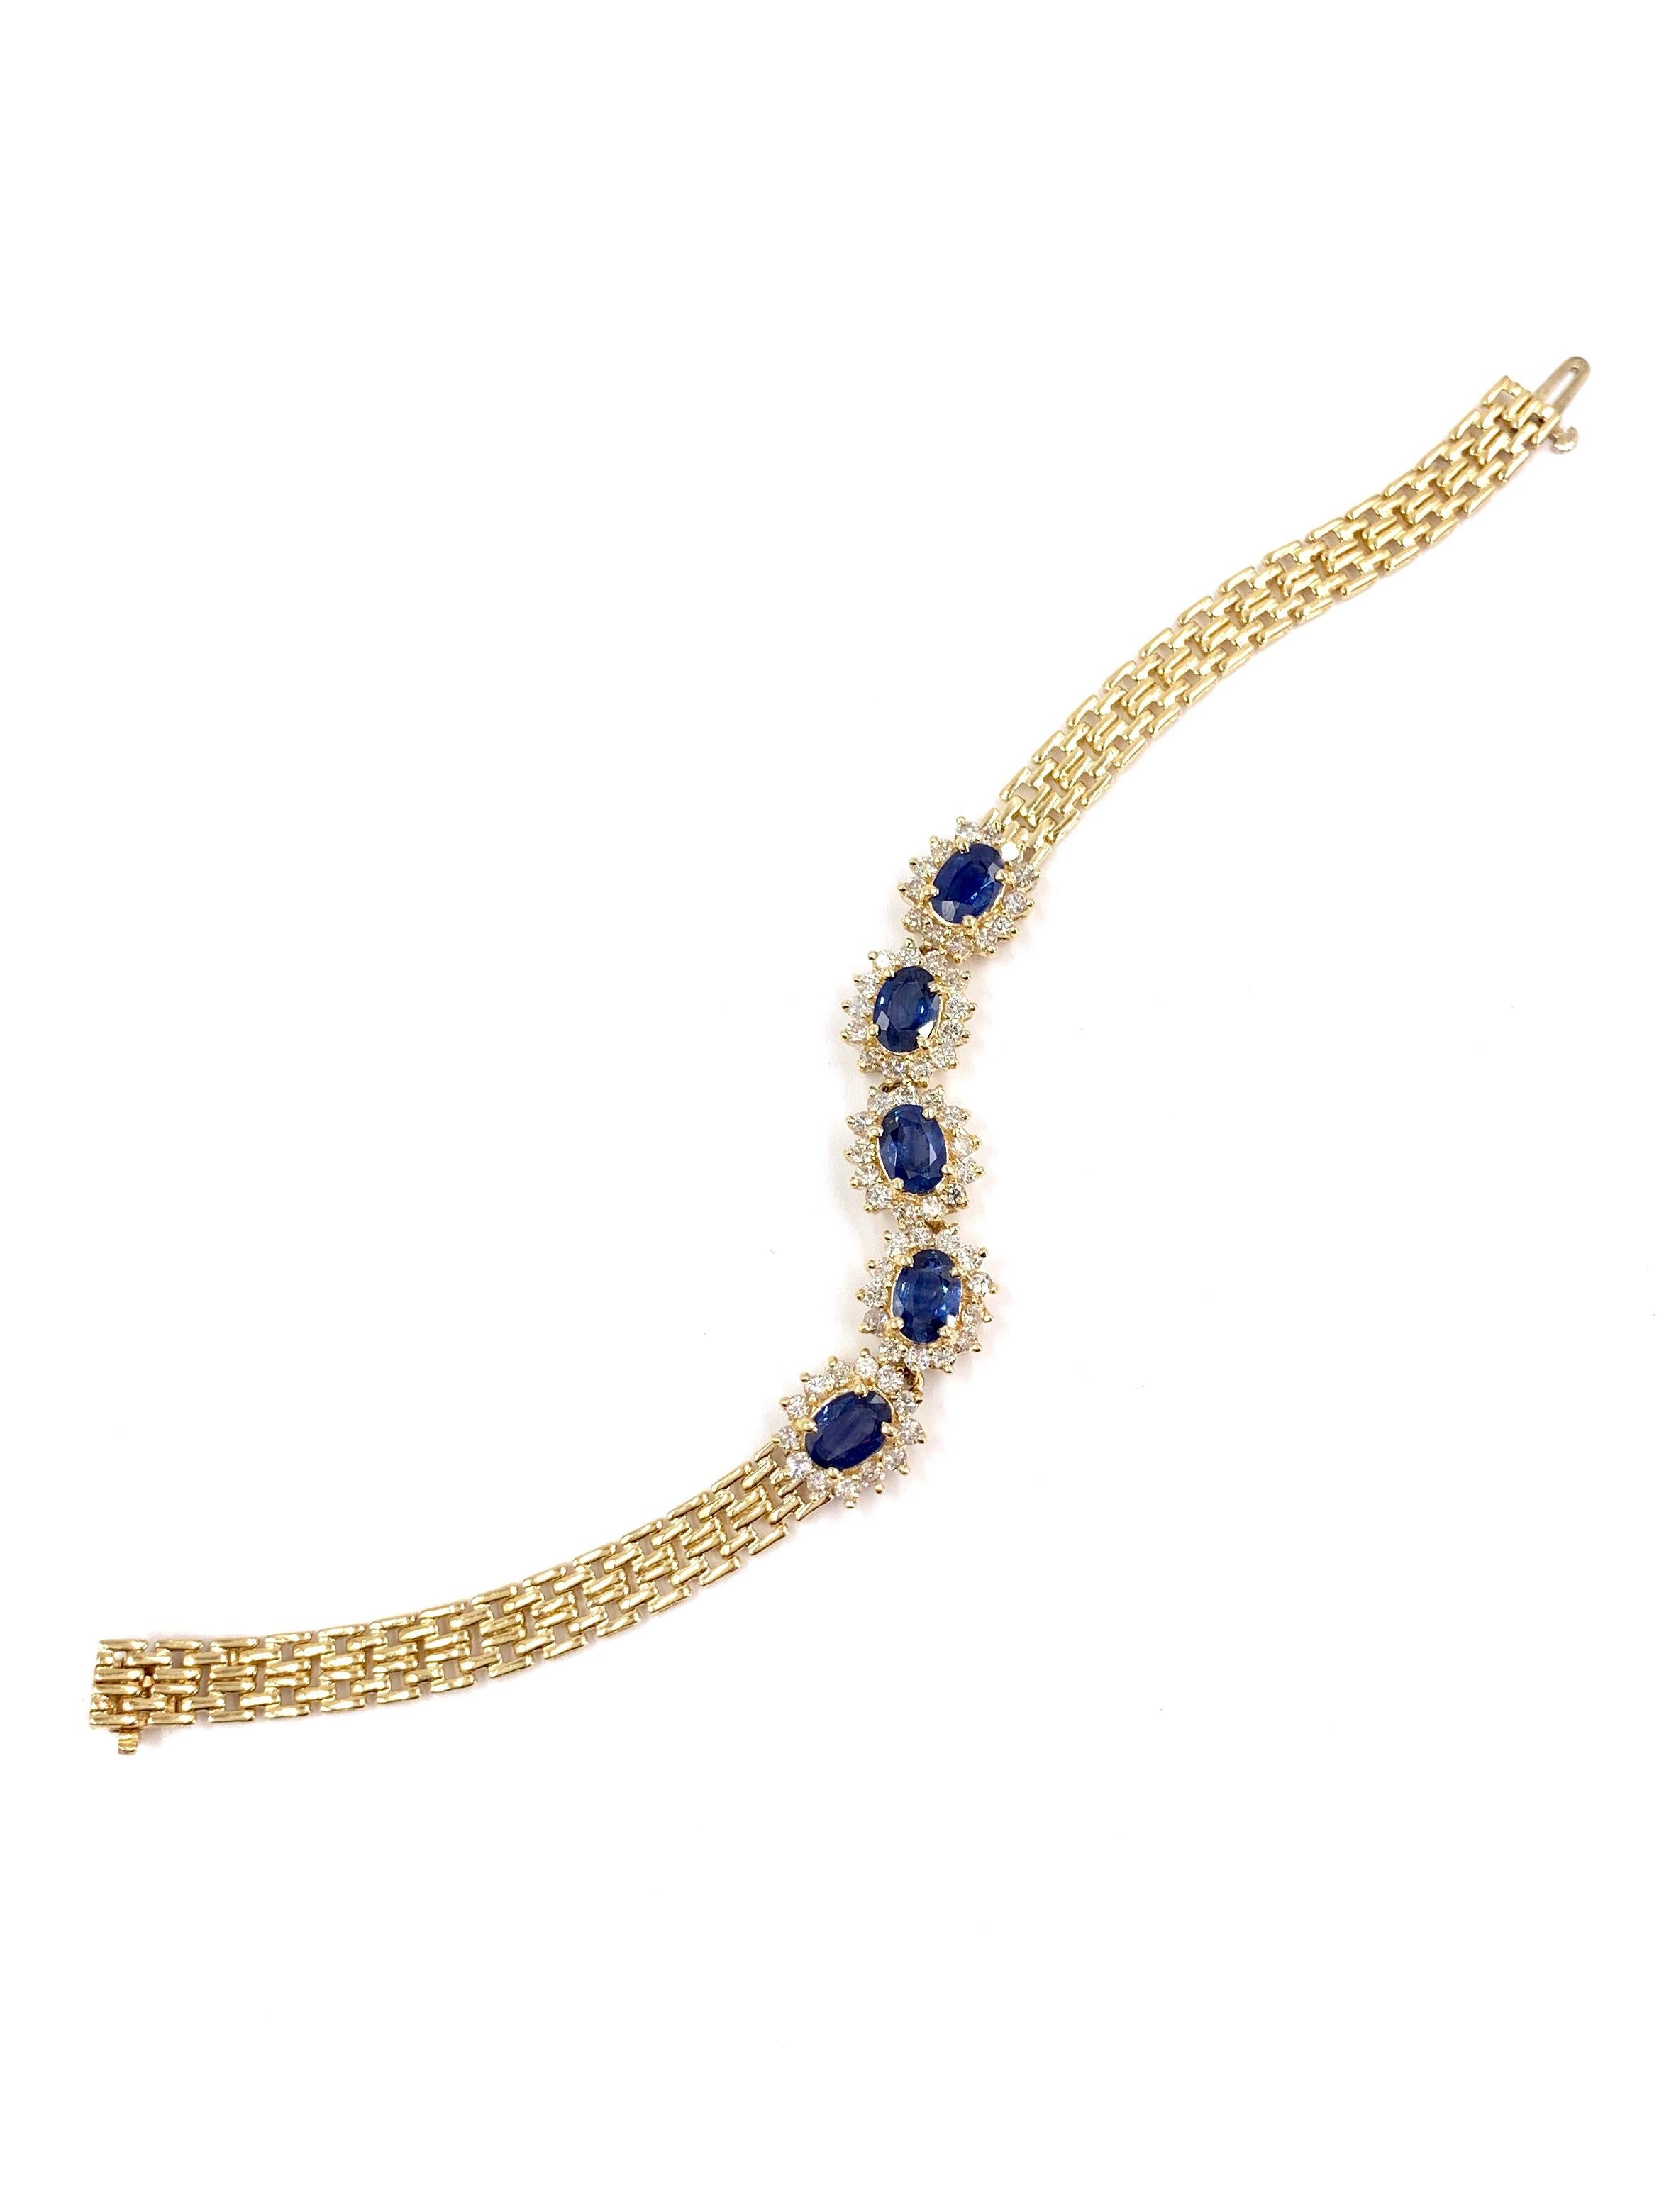 Women's Yellow Gold Oval Blue Sapphire and Diamond Bracelet For Sale